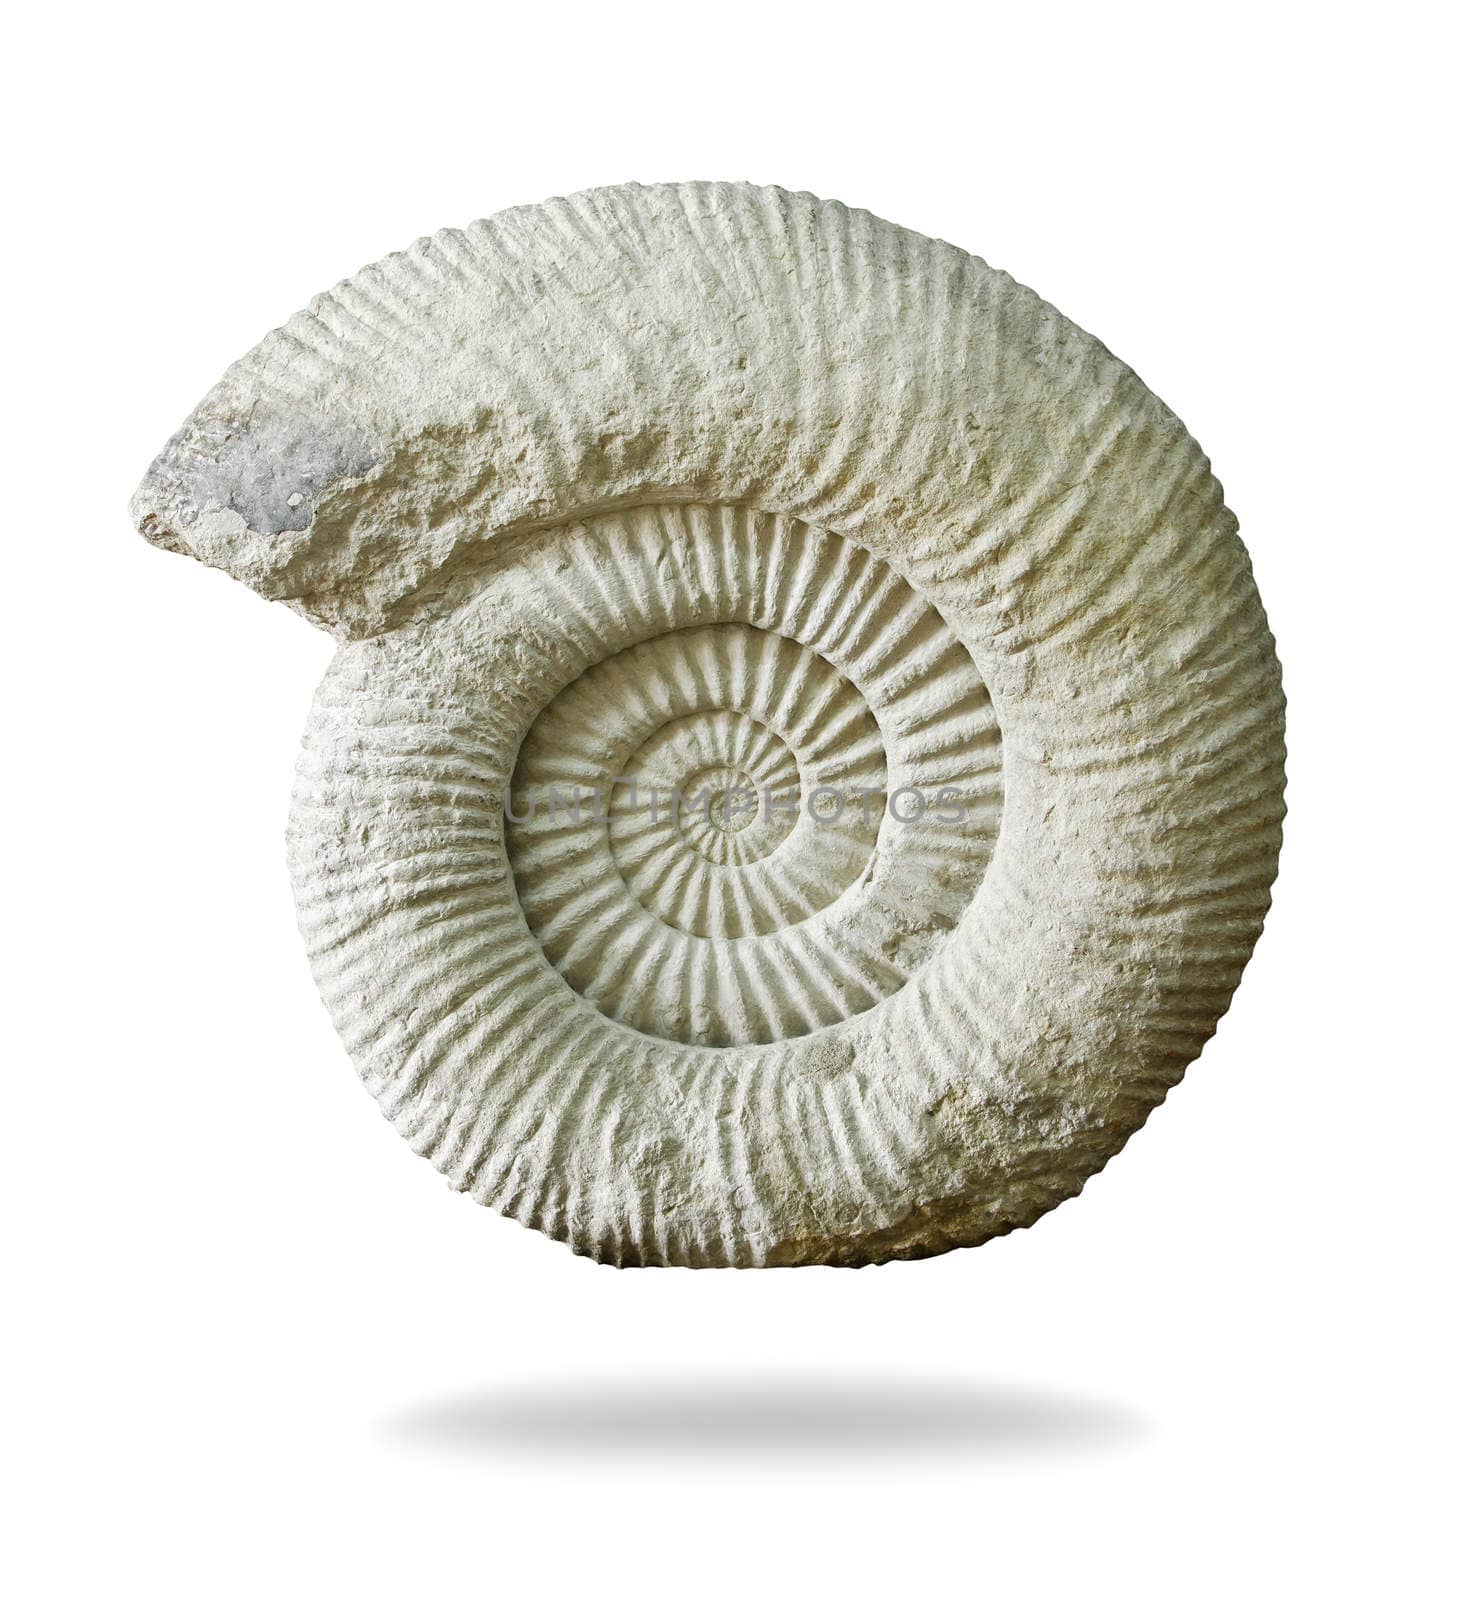 Ammonite prehistoric fossil on white background. clipping path.